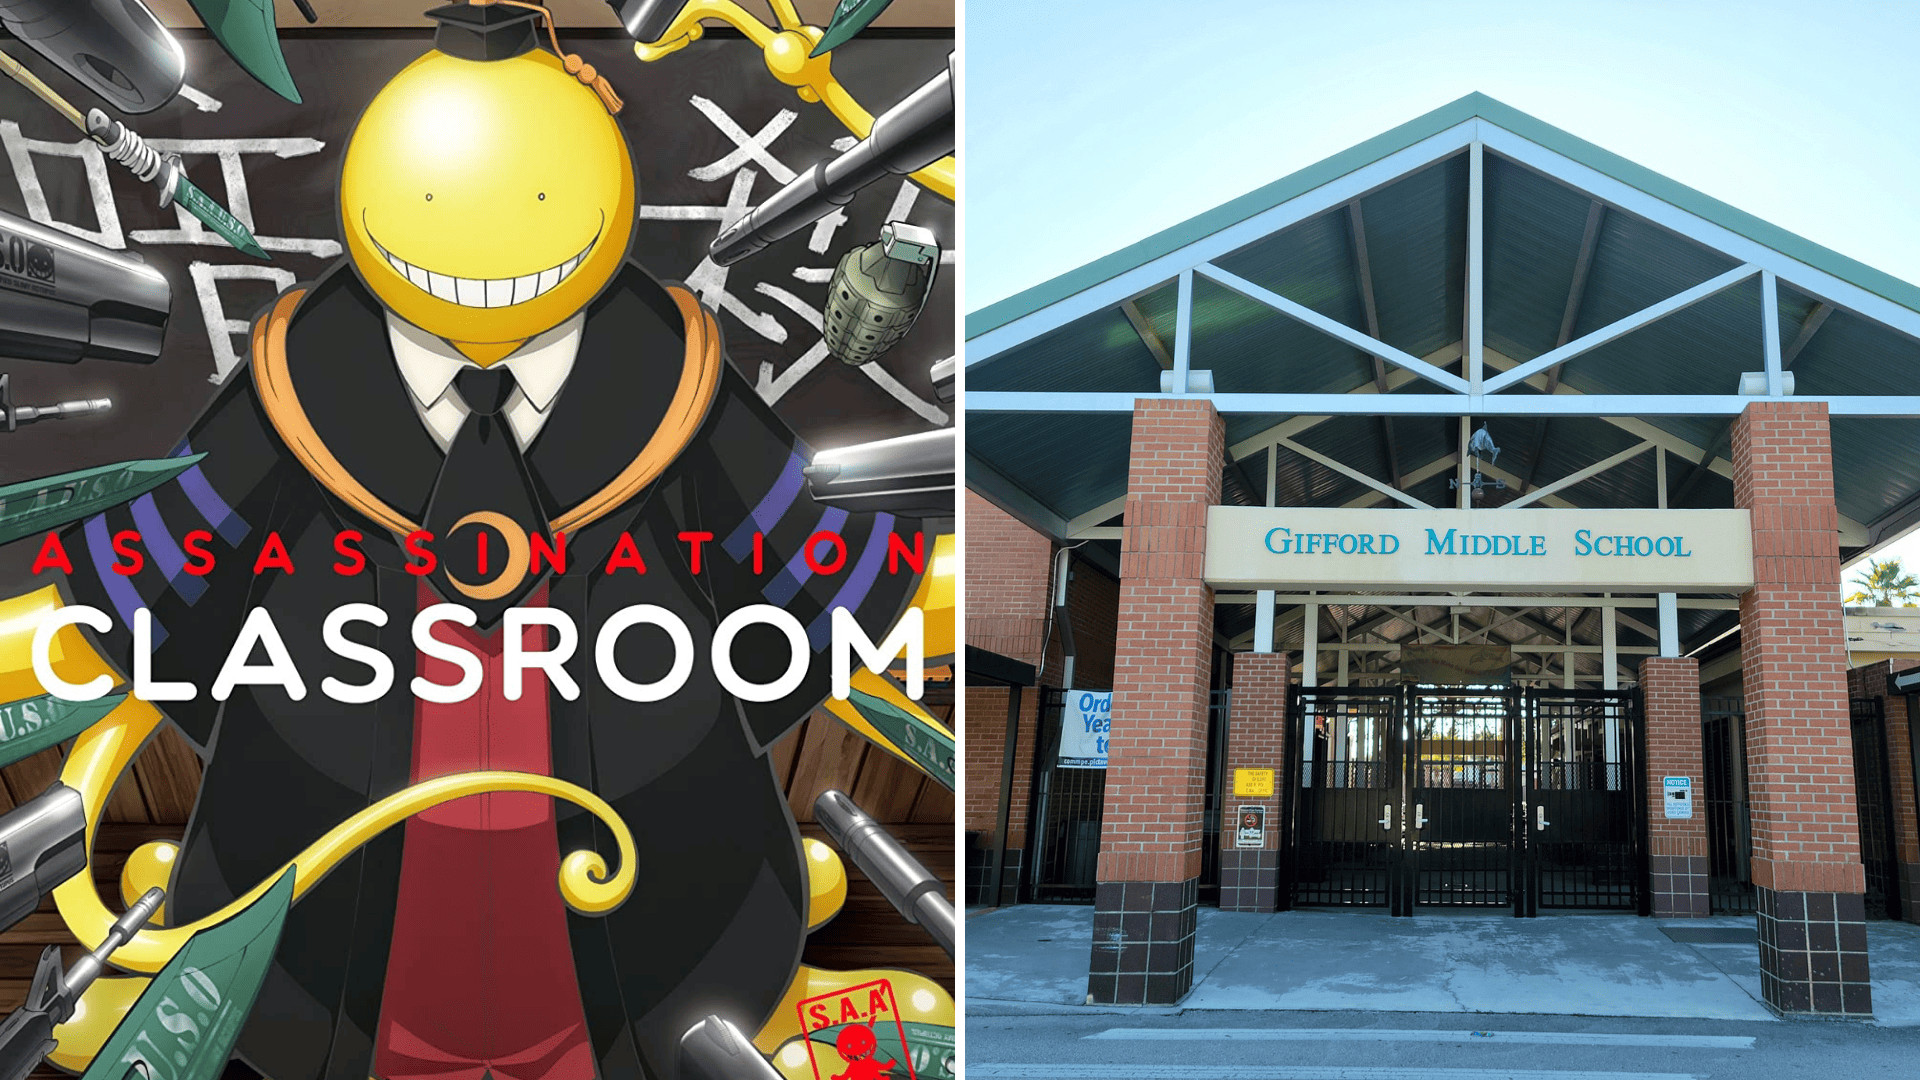 Assassination Classroom Was Banned From United States School for